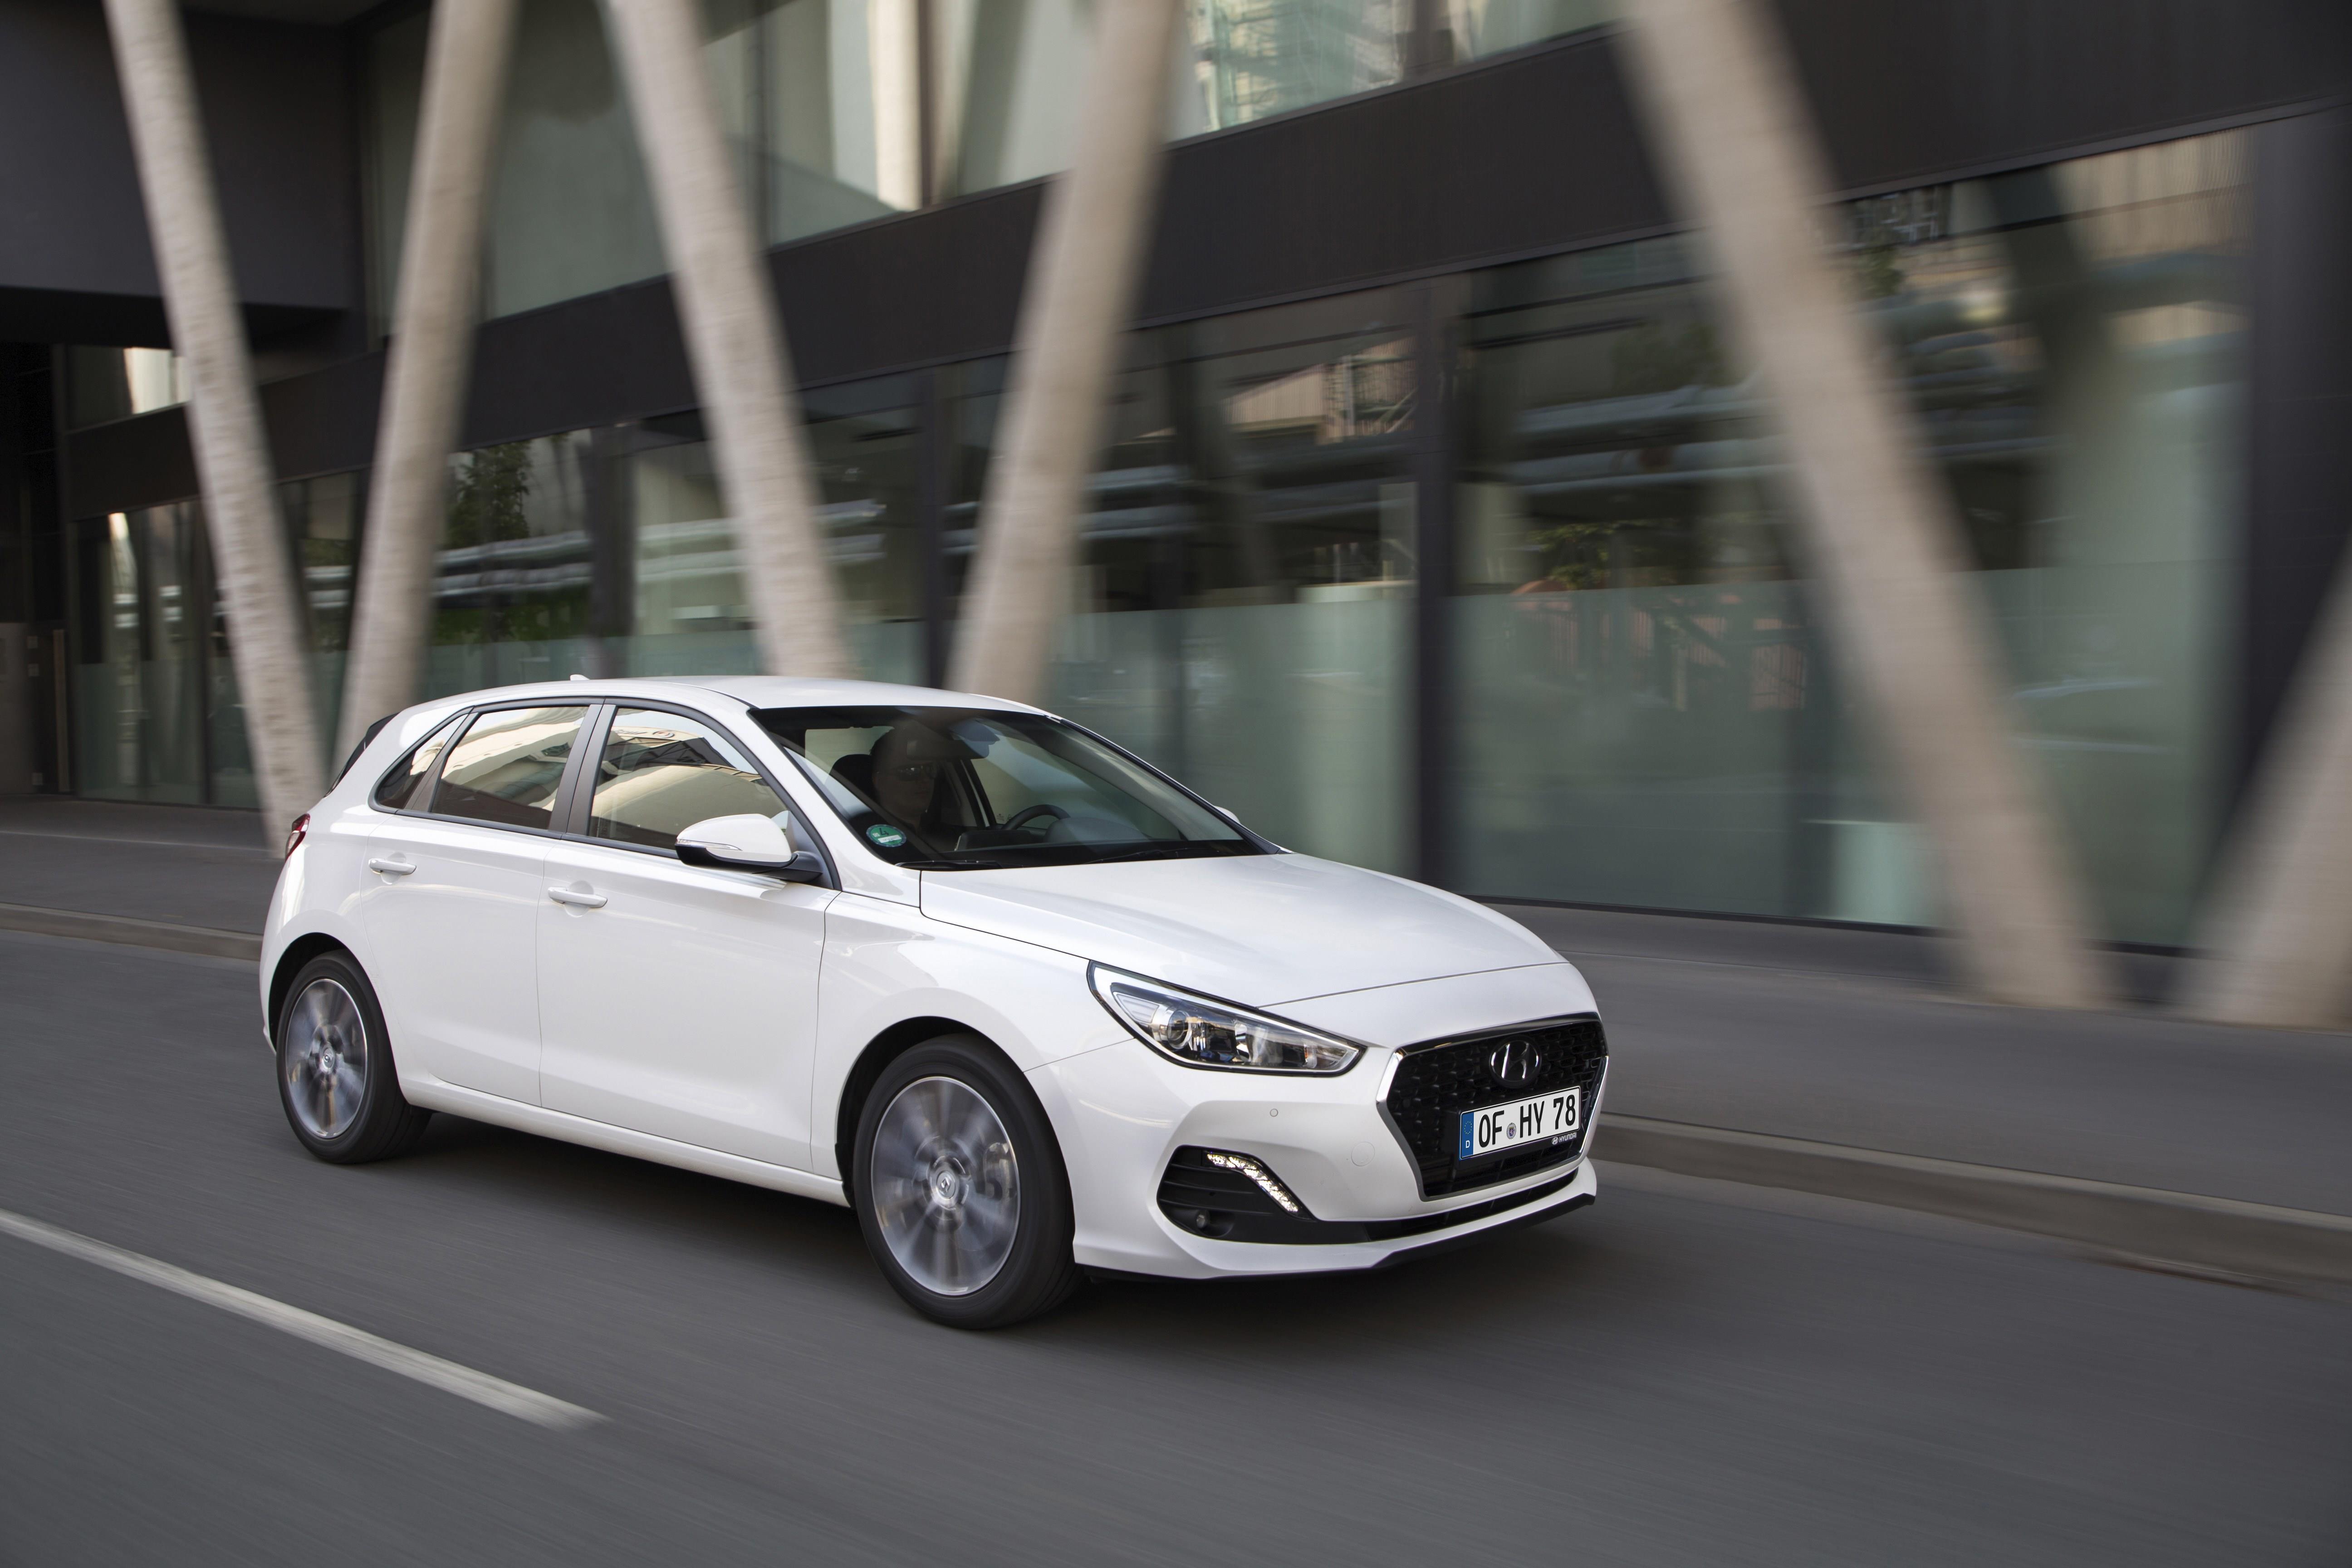 2019 Hyundai i30 landed in Europe with improvements